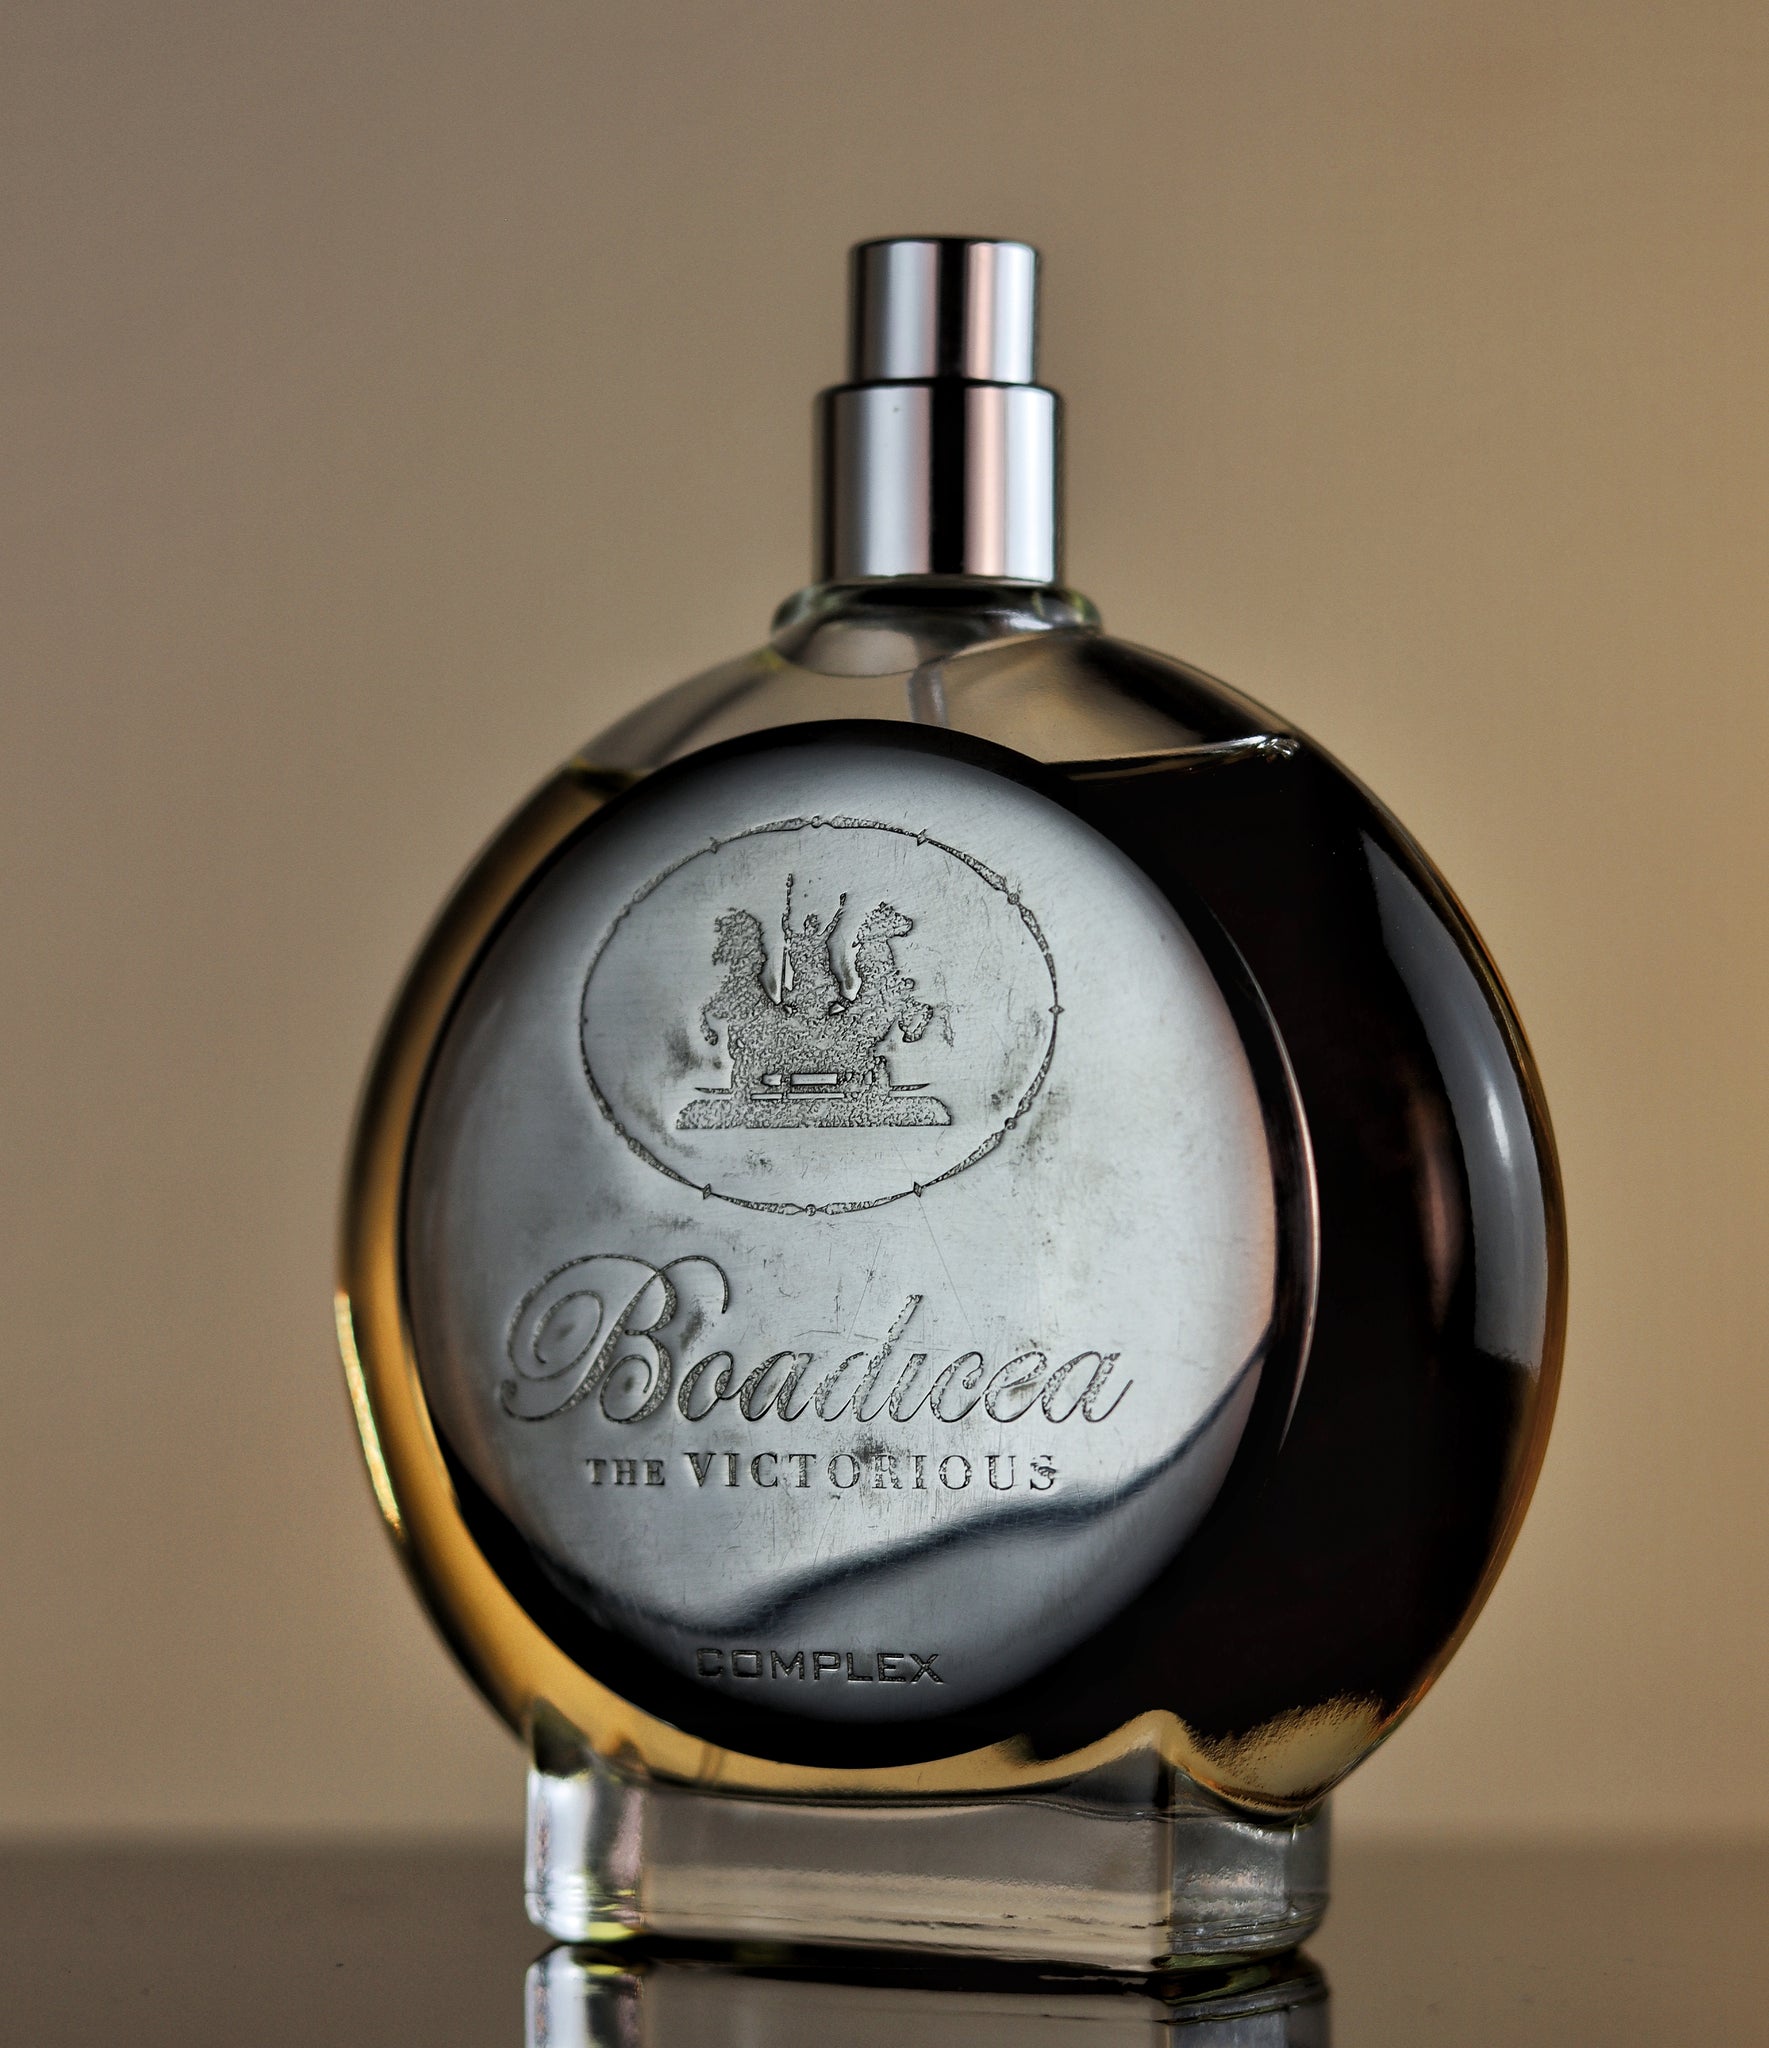 Boadicea The Victorious Complex, Fragrance Sample